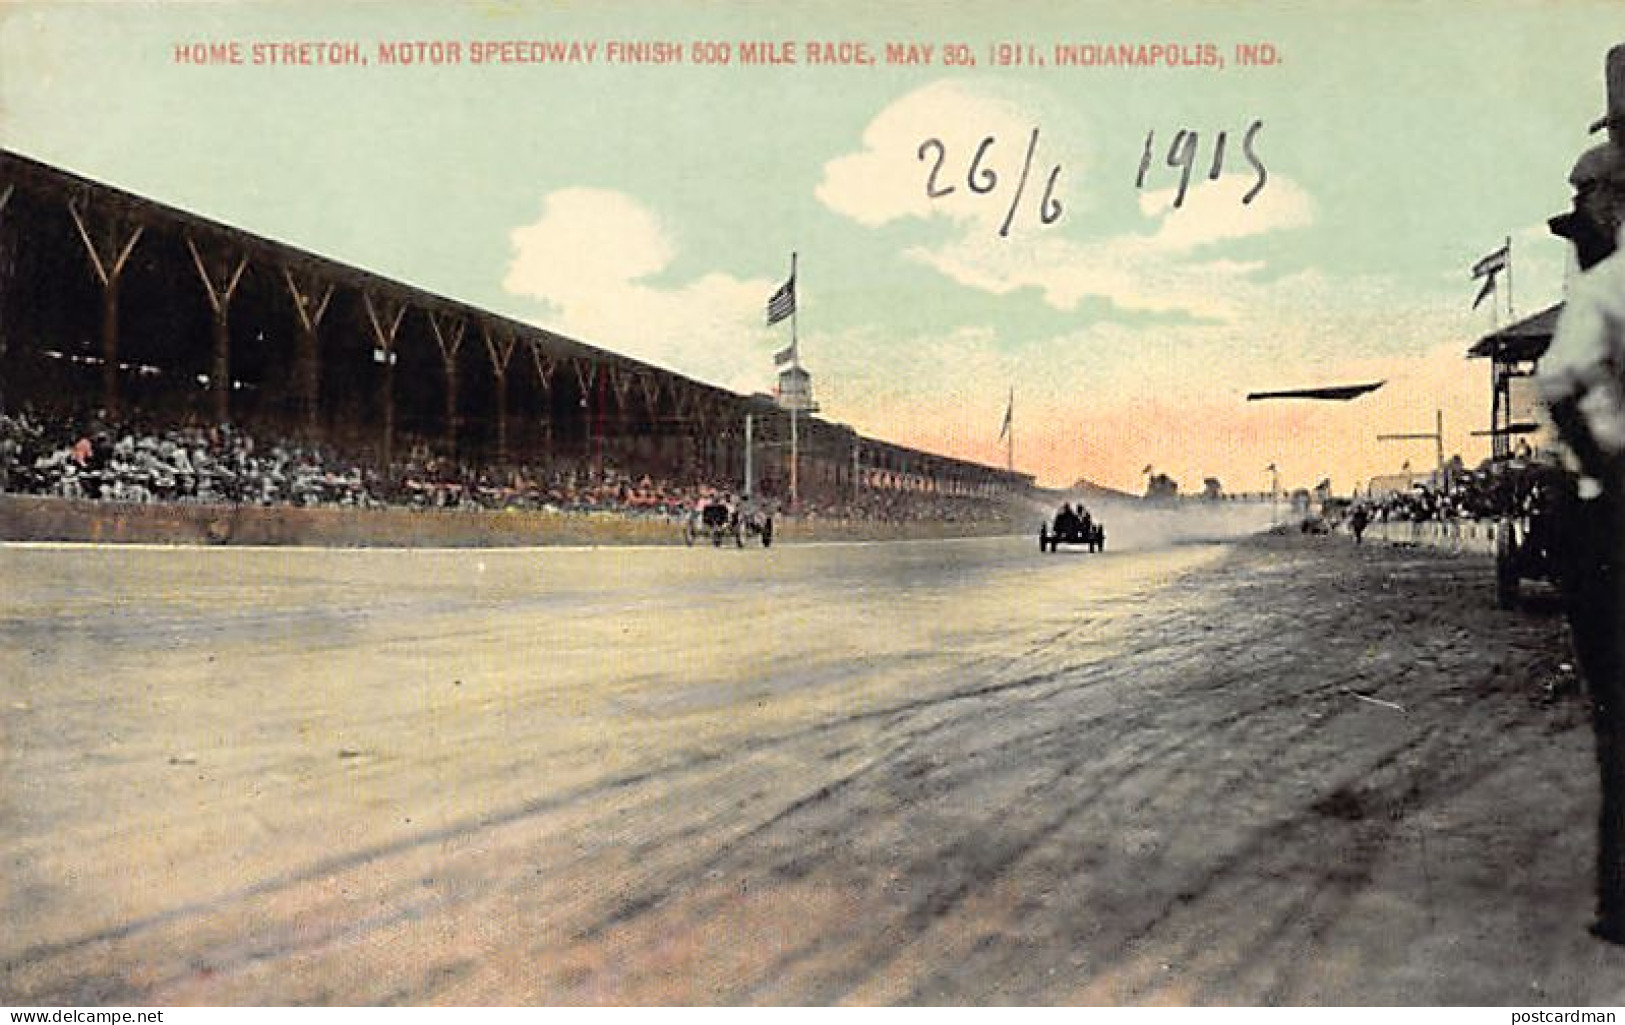 INDIANAPOLIS (IN) Home Stretch, Motor Speedway Finish 500 Mile Race, May 30, 1911 - Indianapolis